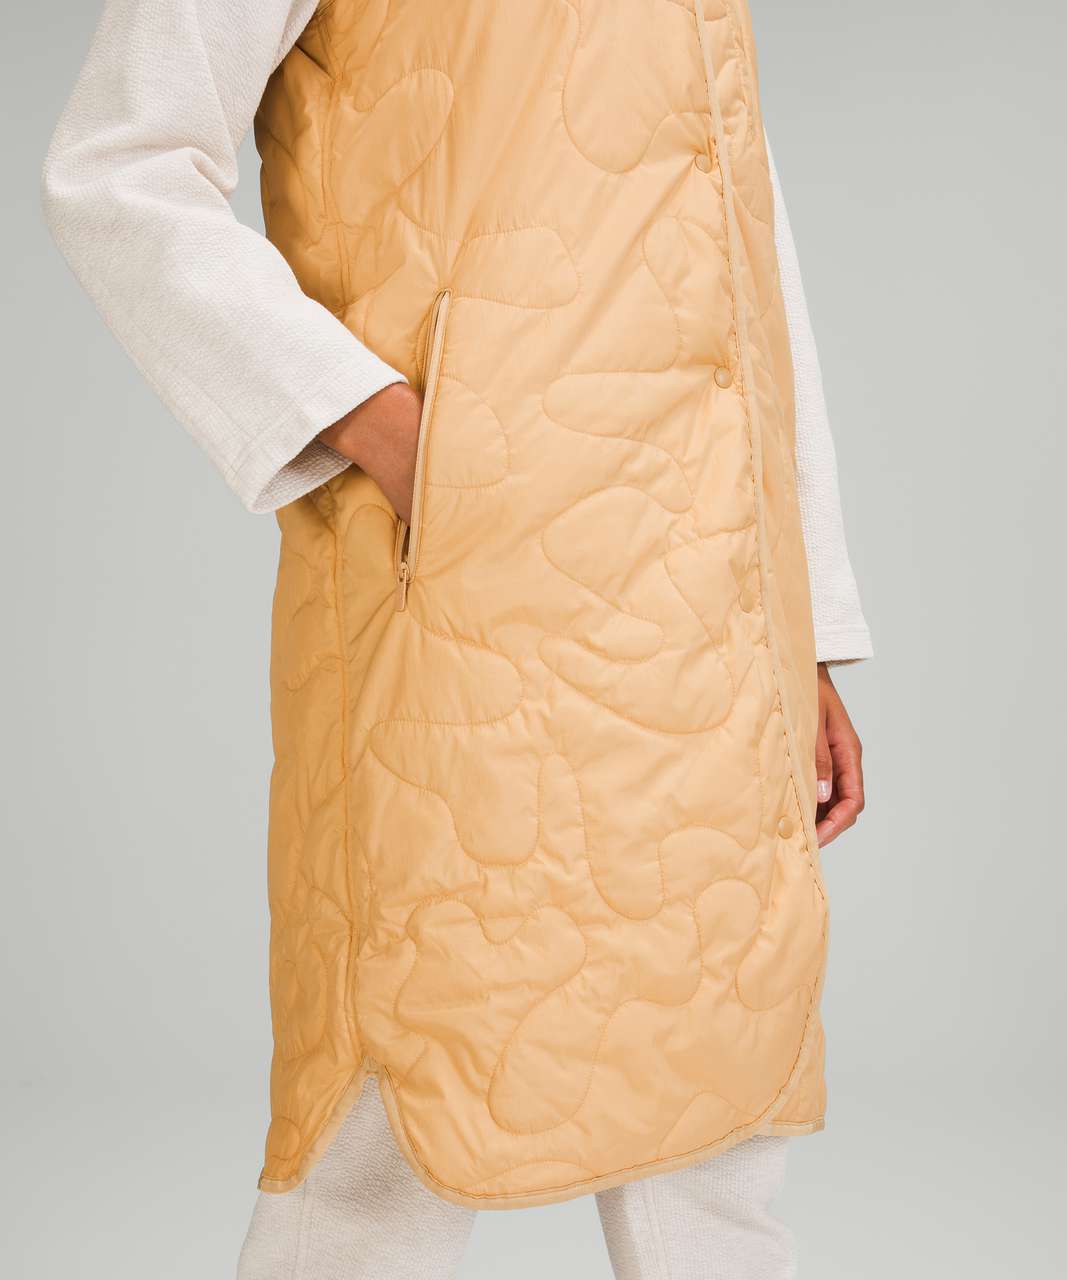 Lululemon Insulated Quilted Long Vest - Heathered Pecan Tan